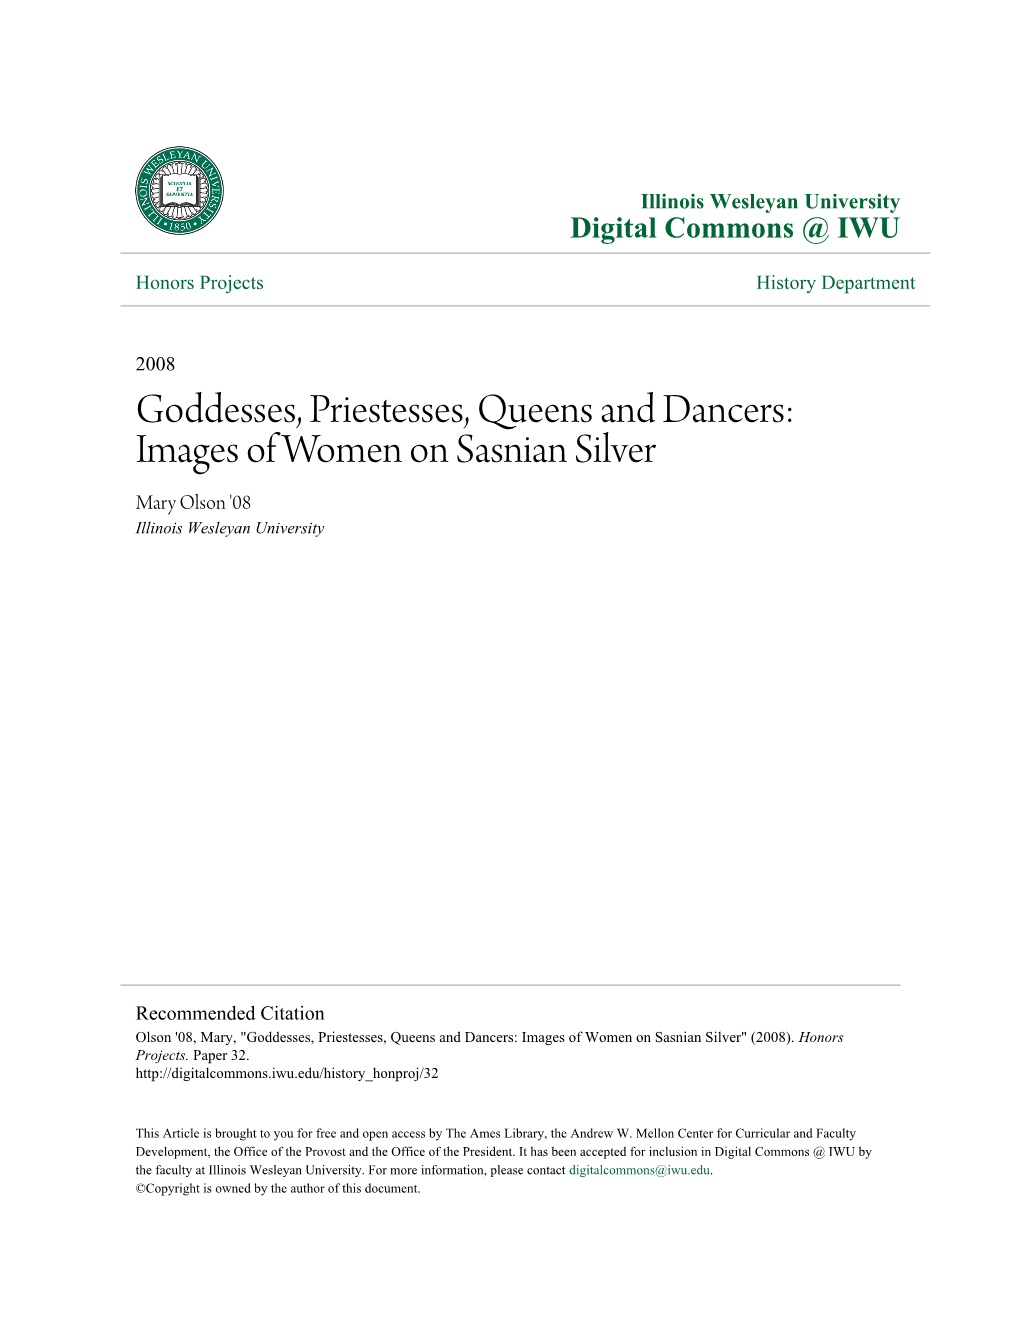 Goddesses, Priestesses, Queens and Dancers: Images of Women on Sasnian Silver Mary Olson '08 Illinois Wesleyan University